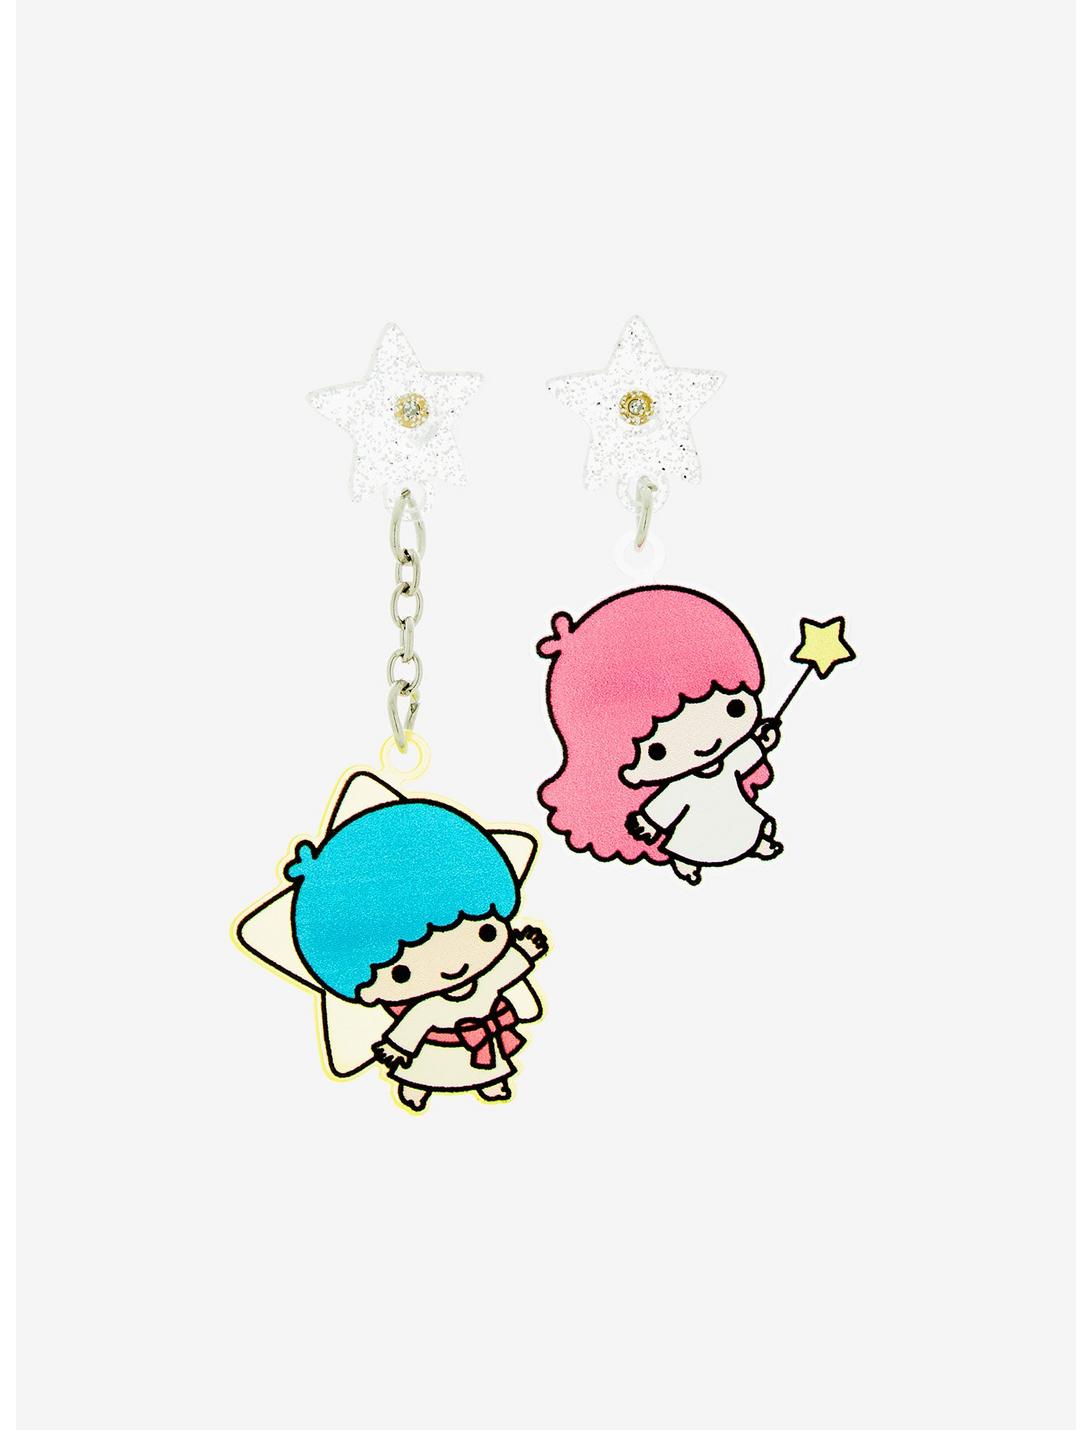 Sanrio Little Twin Stars Charm Earrings - BoxLunch Exclusive, , hi-res